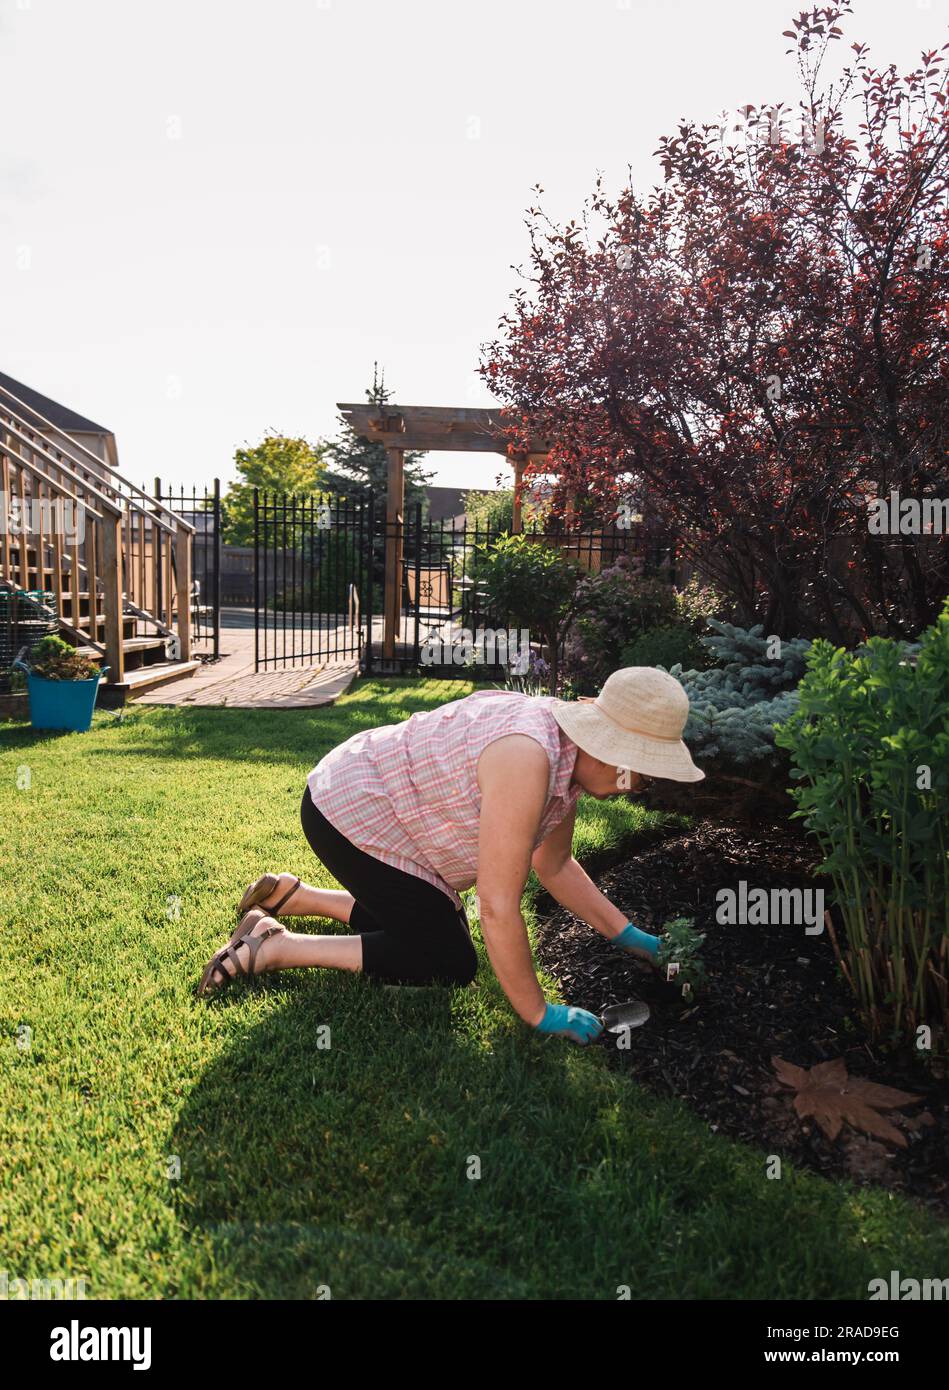 Older woman in a hat planting flowers in a garden on a summer day. Stock Photo